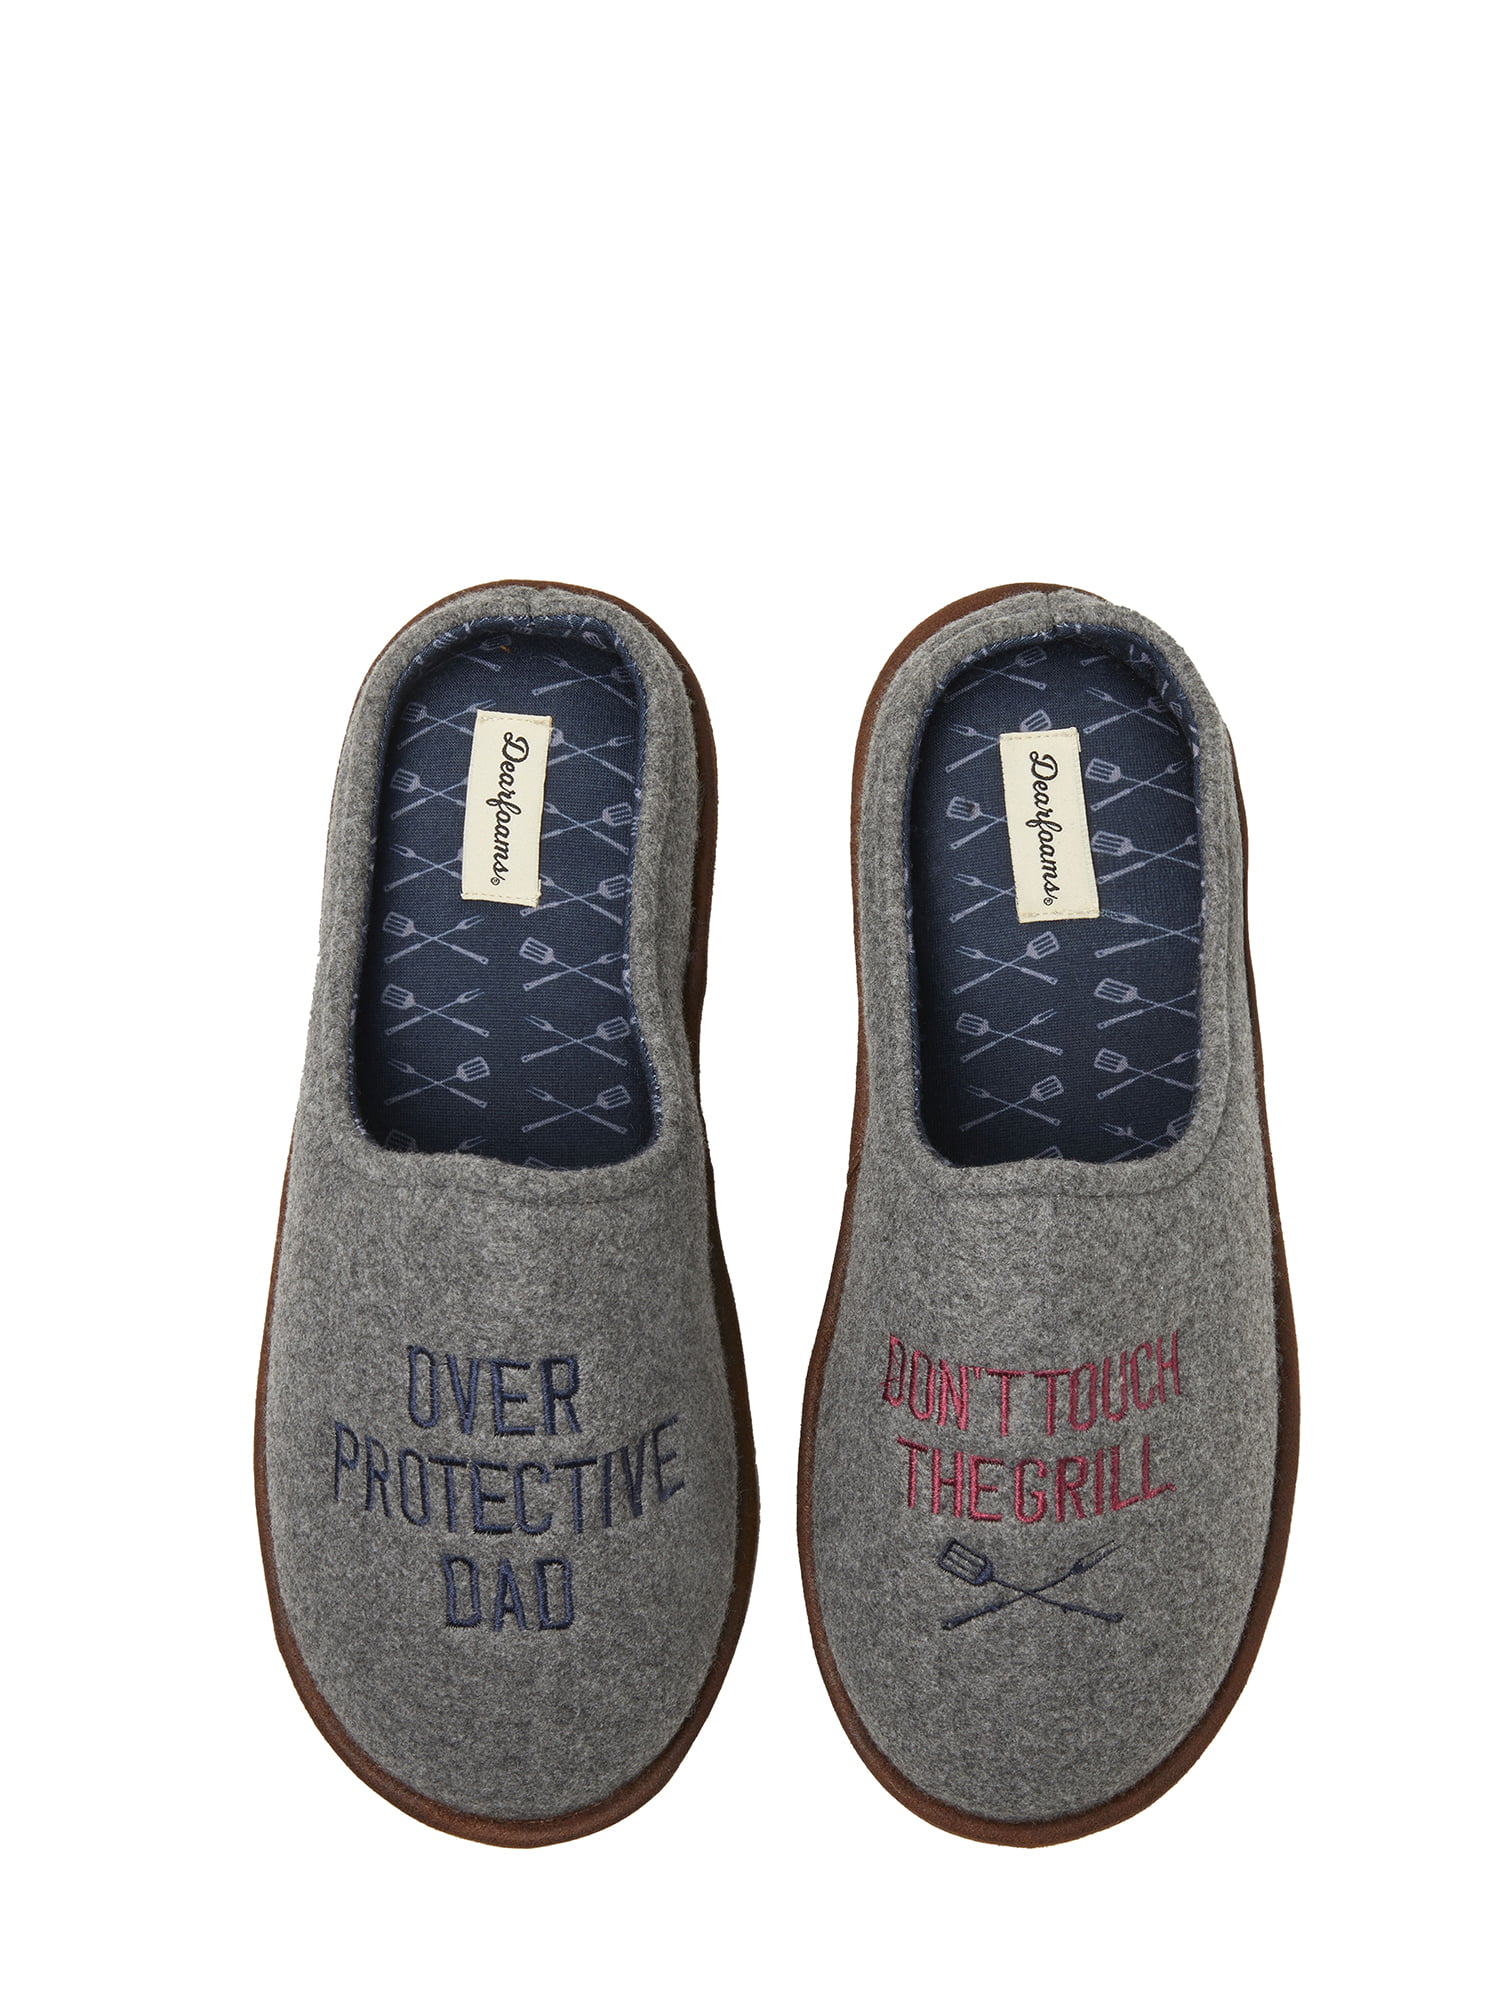 best dad slippers